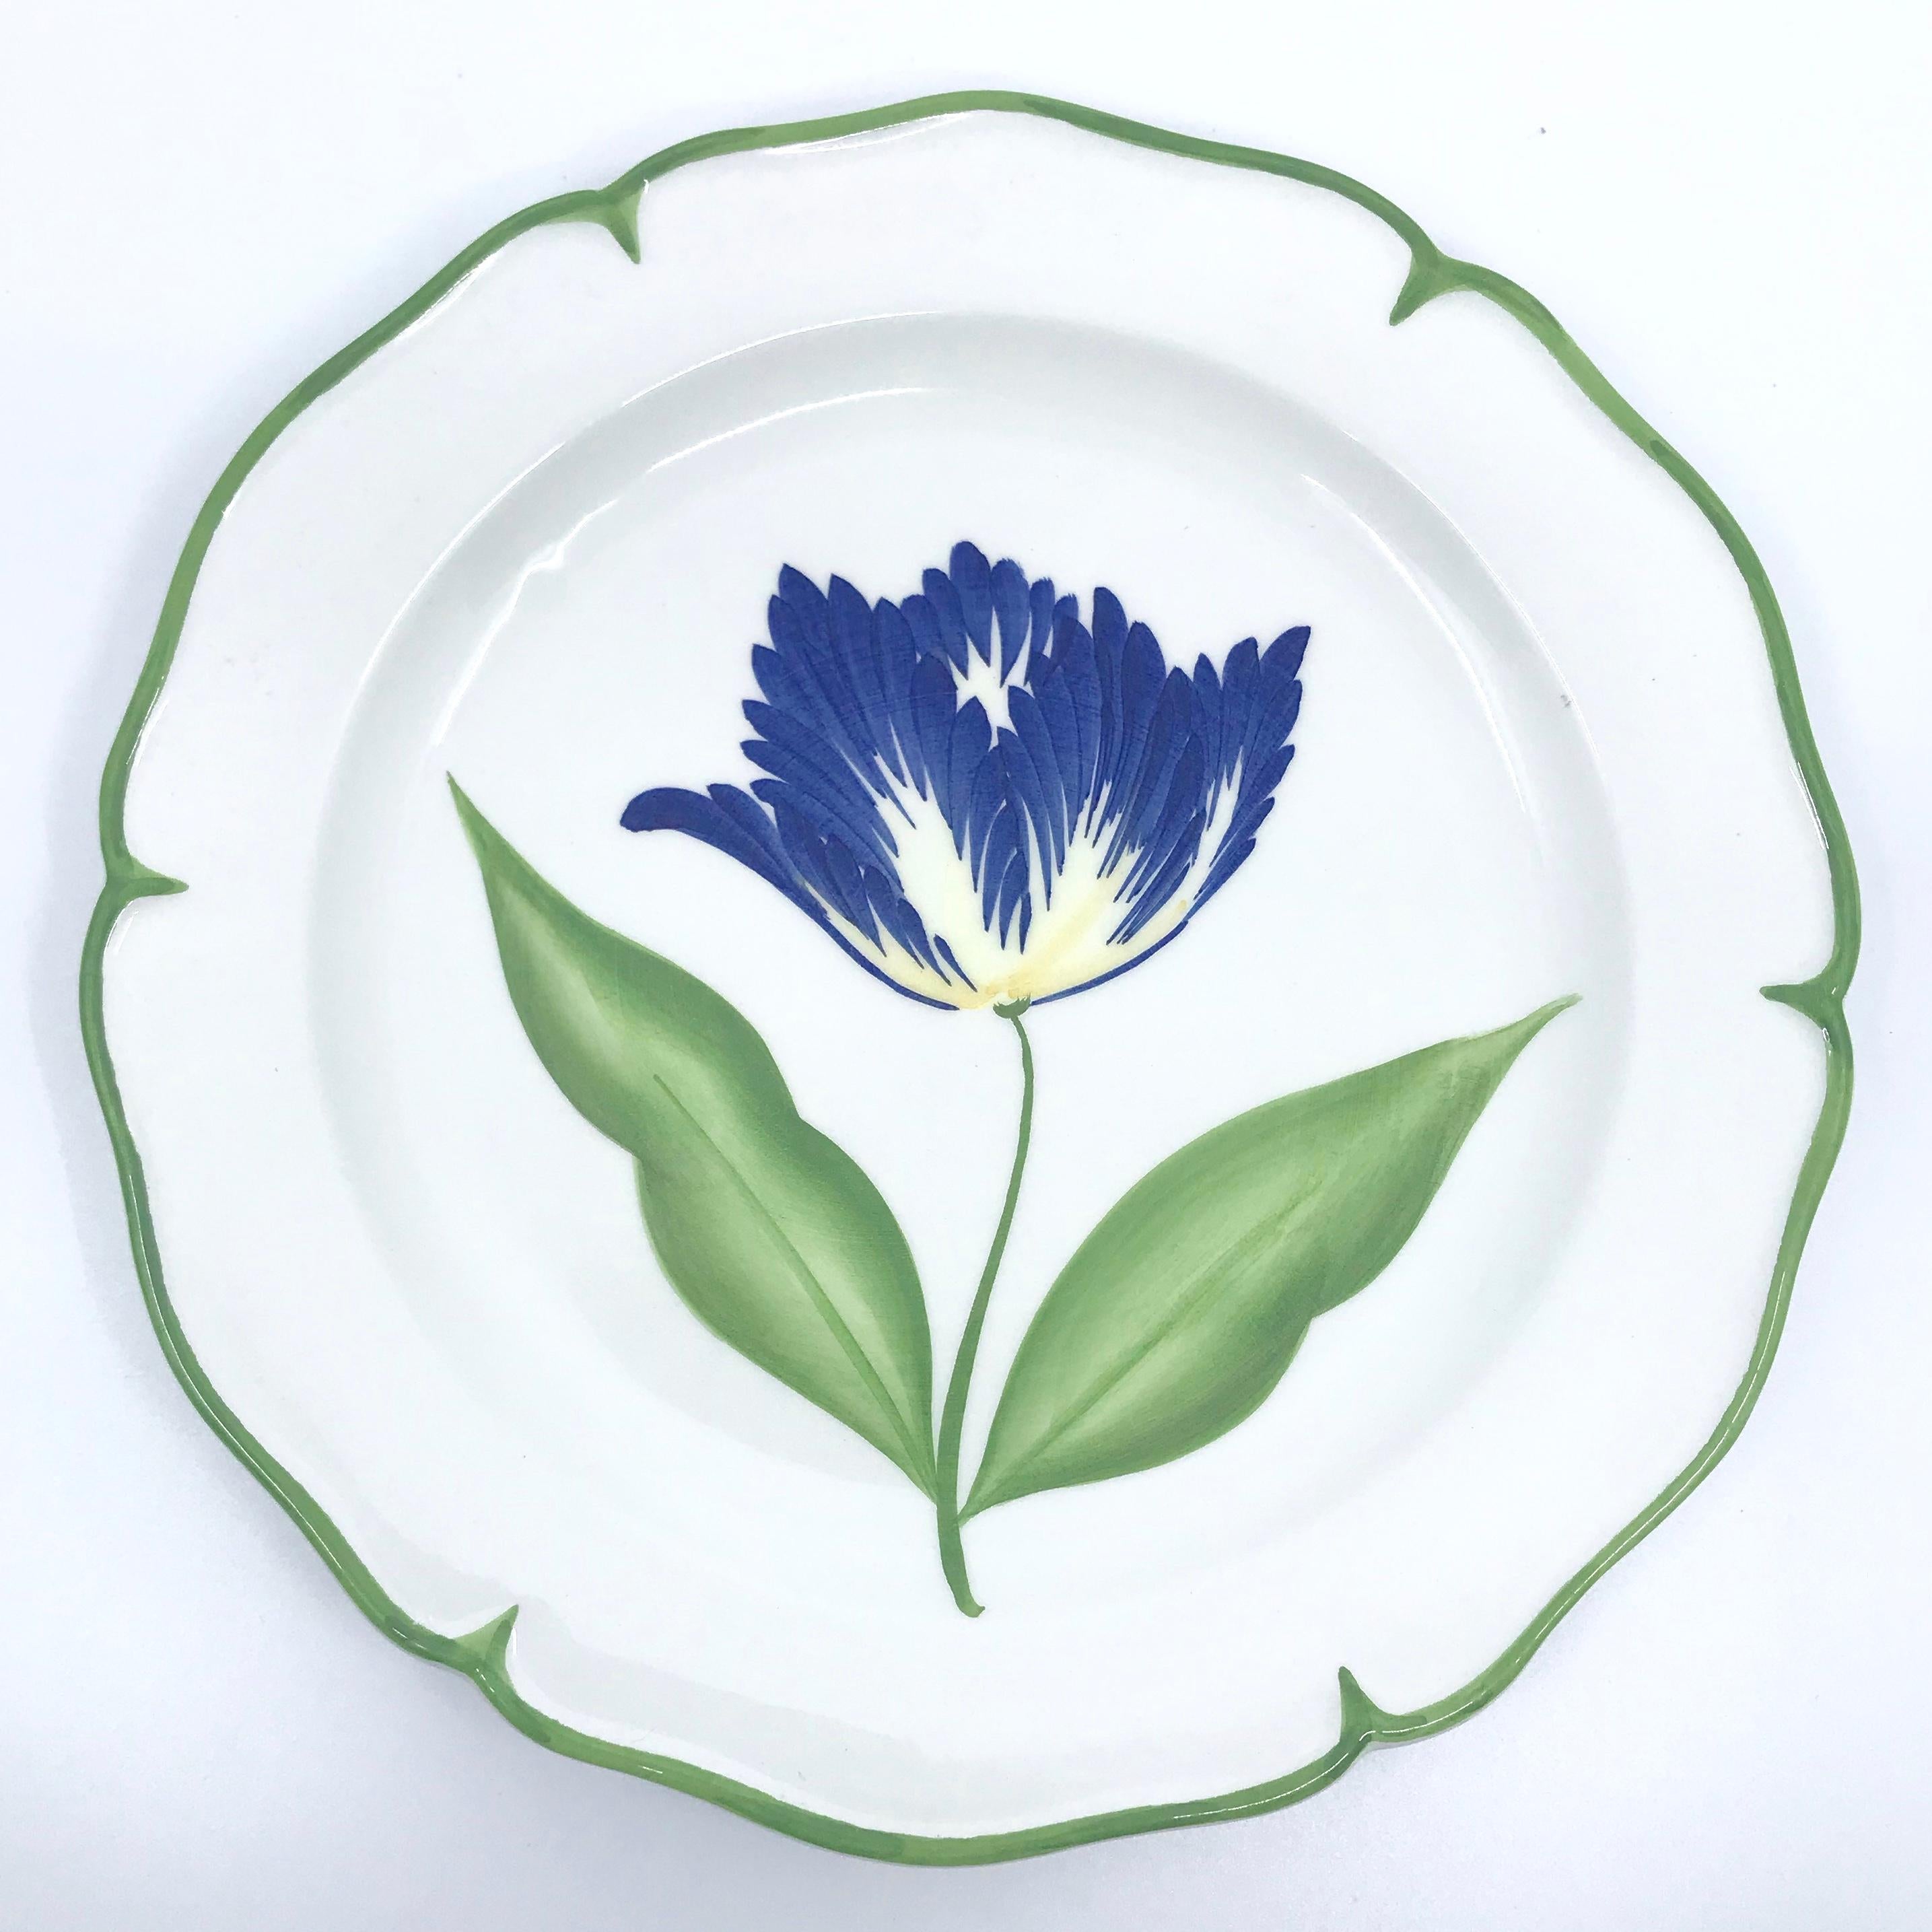 Set of four flower plates with green border. Four individually hand painted vintage pottery plates with shaped green borders featuring one of four different tulips in magenta, red, apricot and blue. Italy, 1970s.
Dimensions: 8” diameter x .88